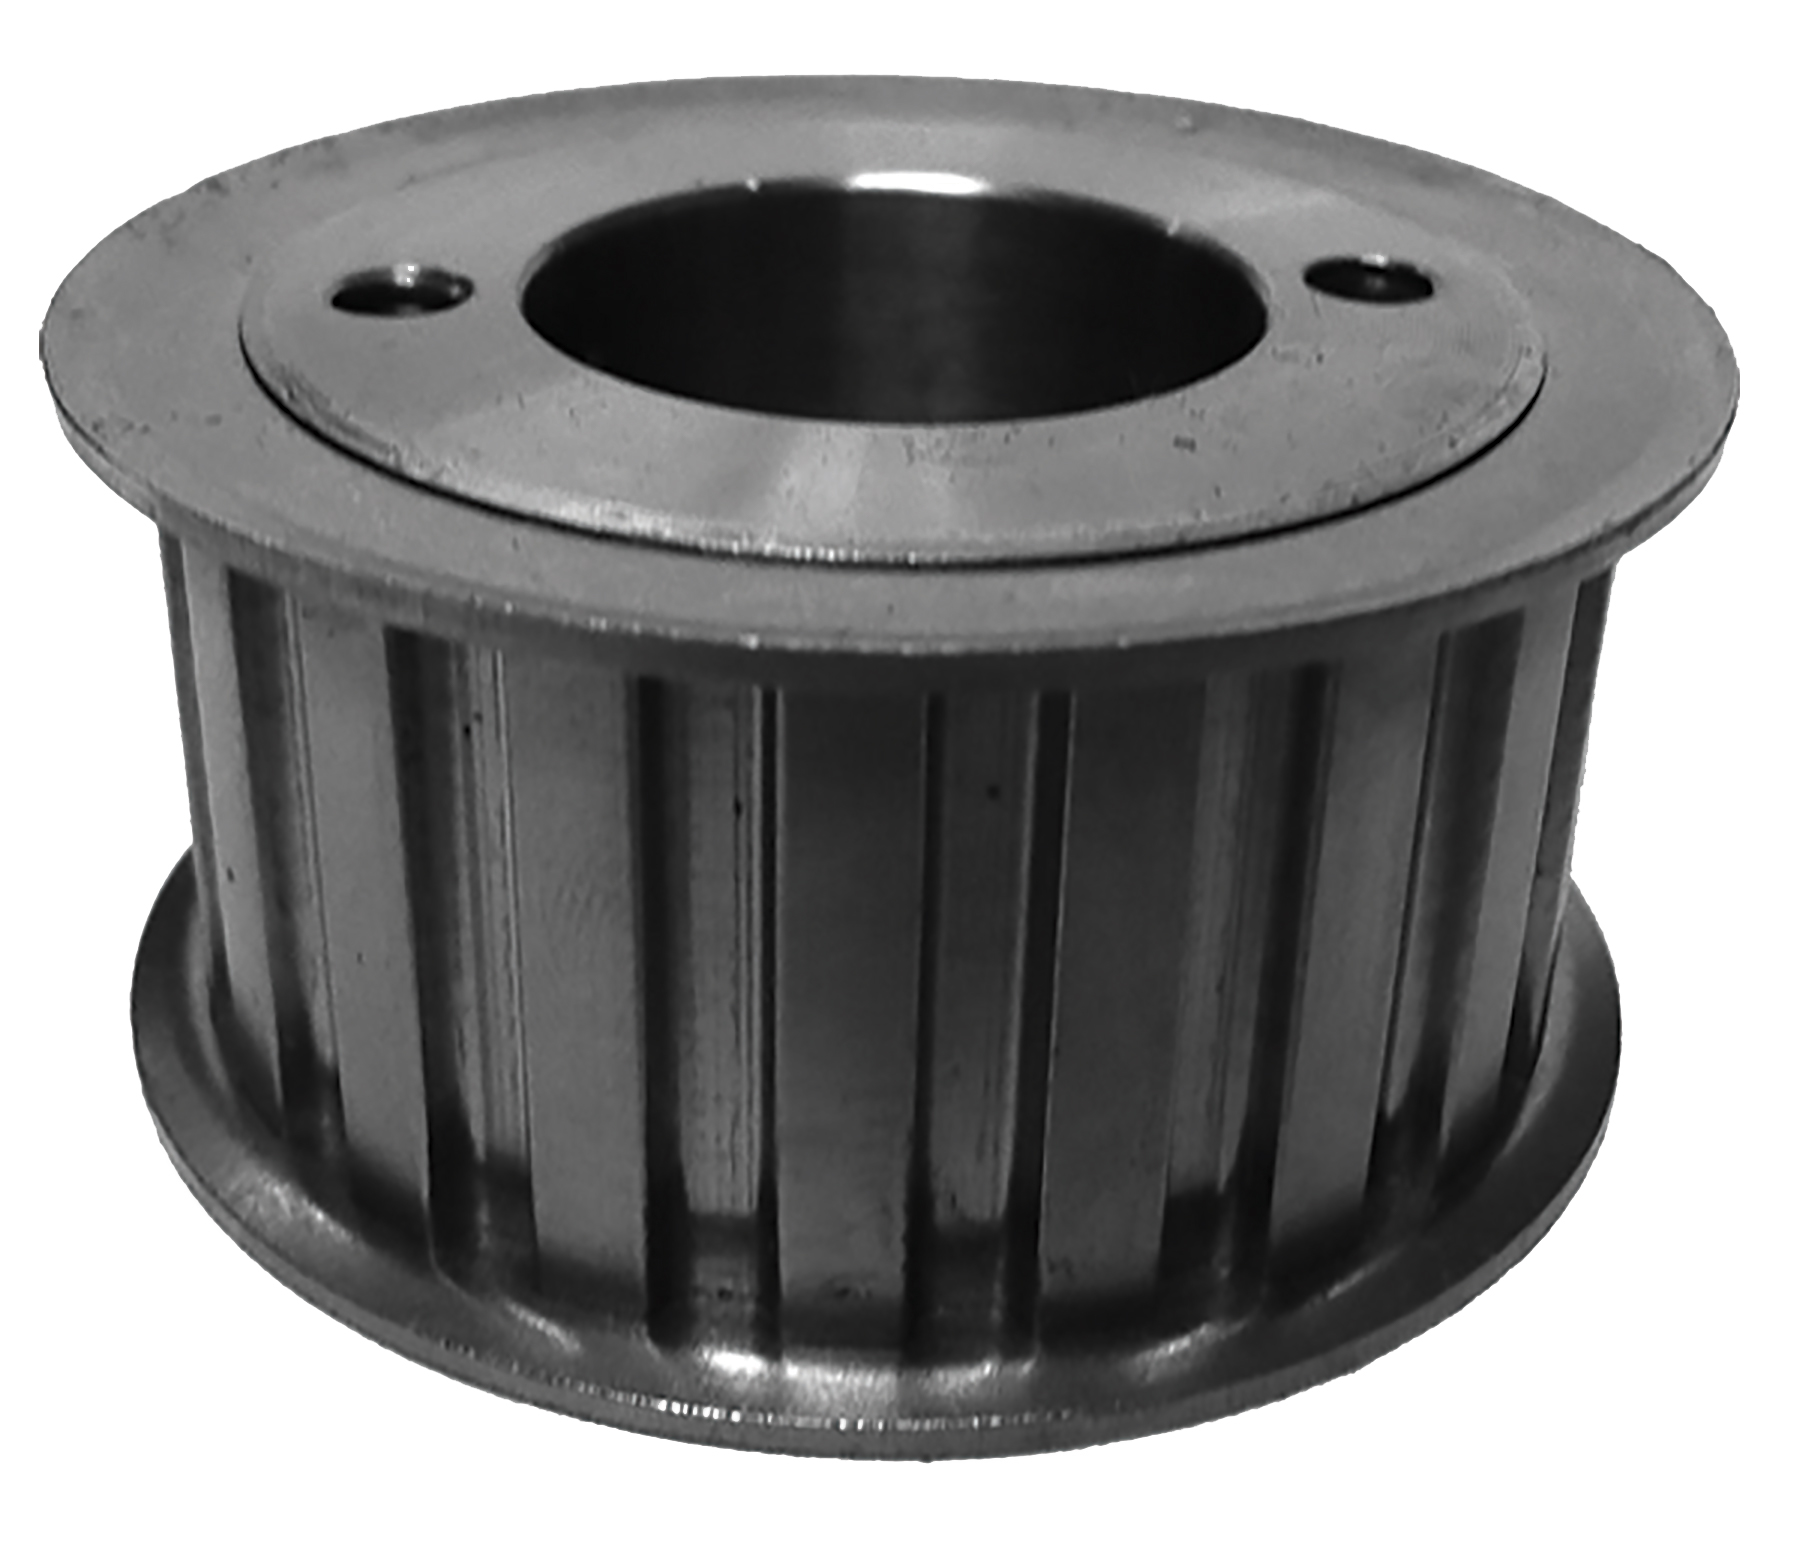 18LG100 - Steel Imperial Pitch Pulleys